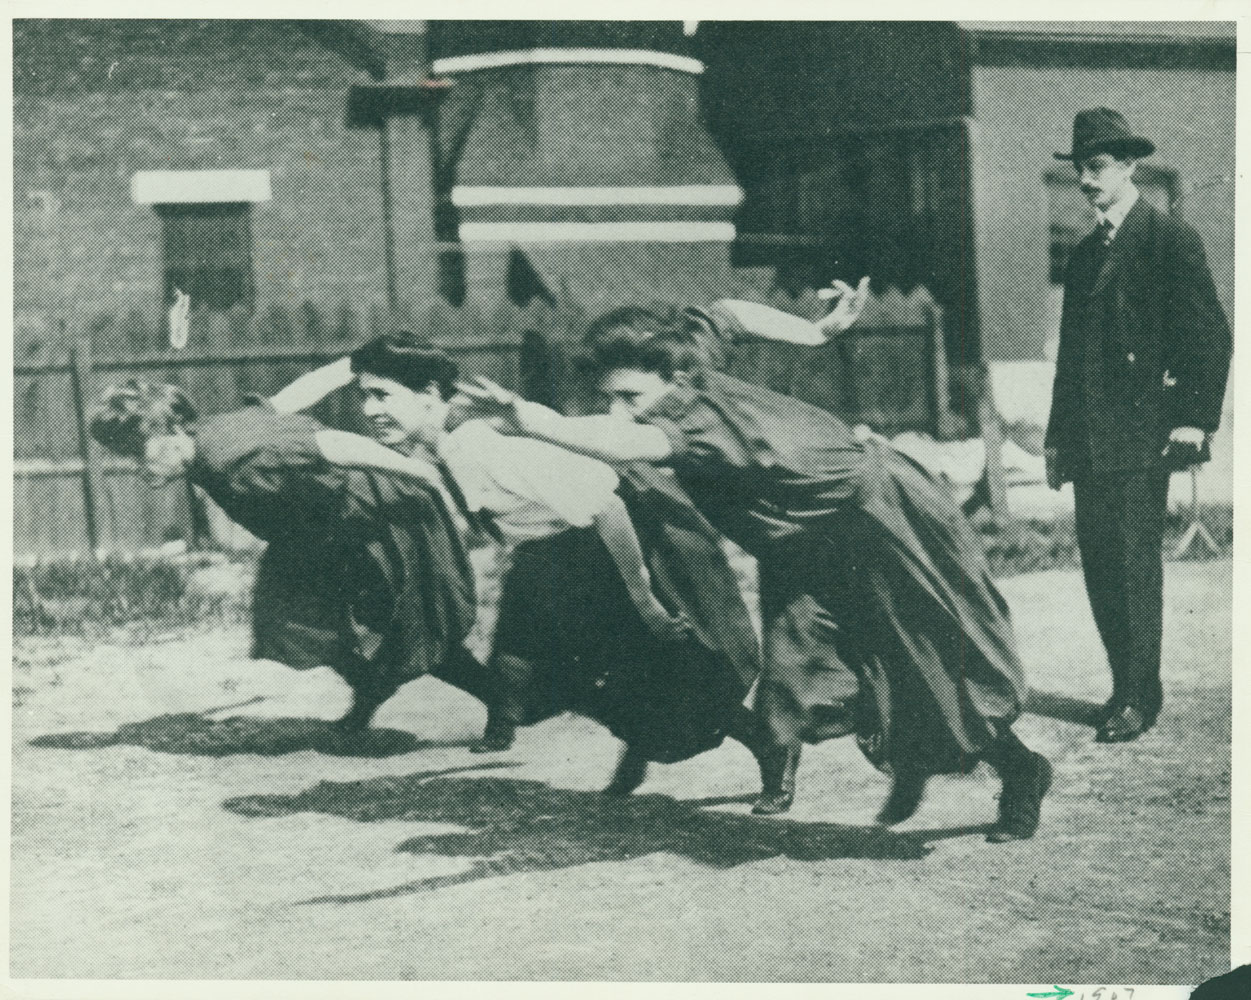 A black and white image of three women racing in dresses